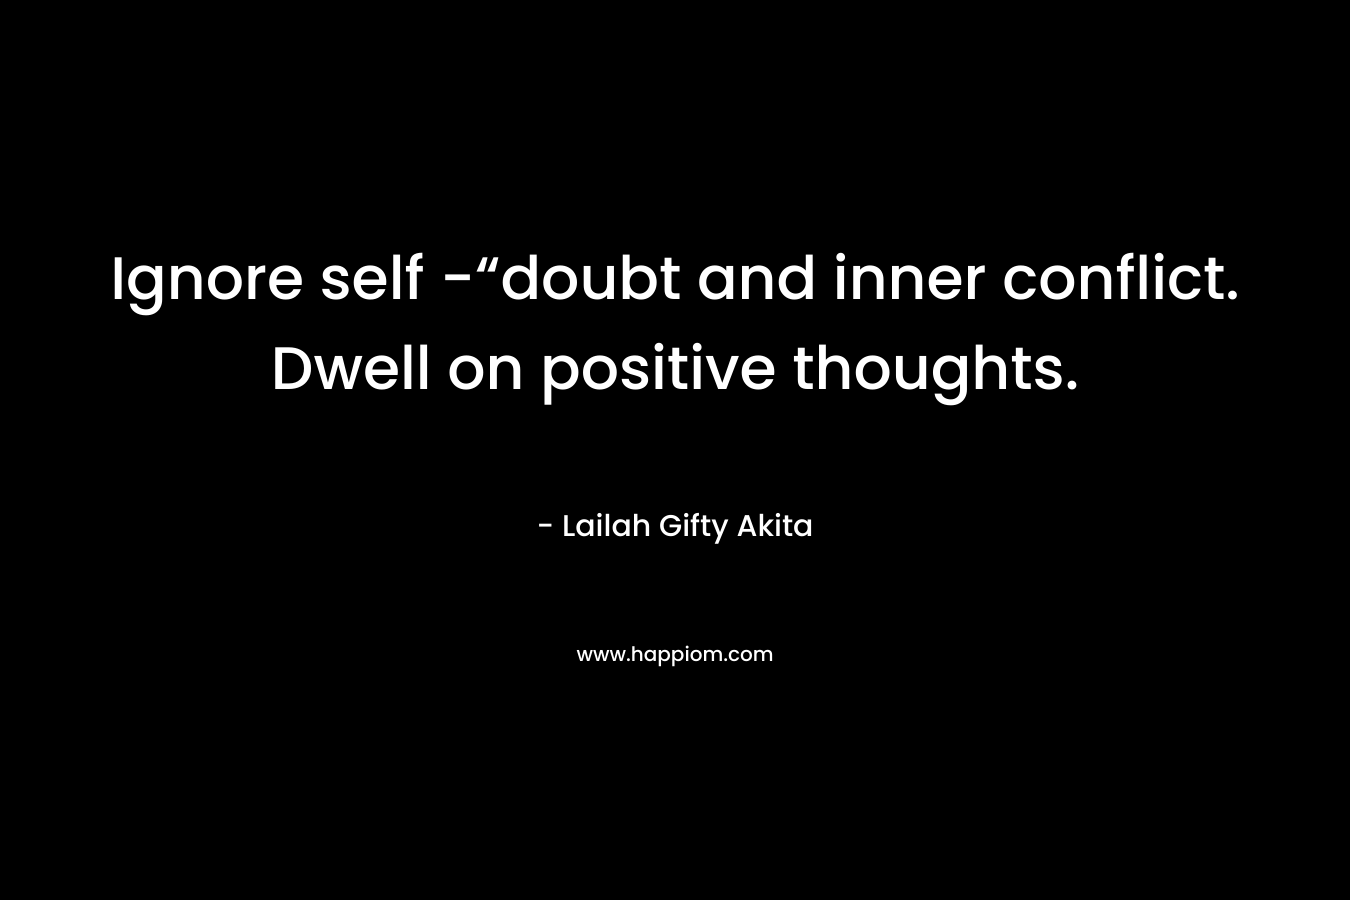 Ignore self -“doubt and inner conflict. Dwell on positive thoughts.